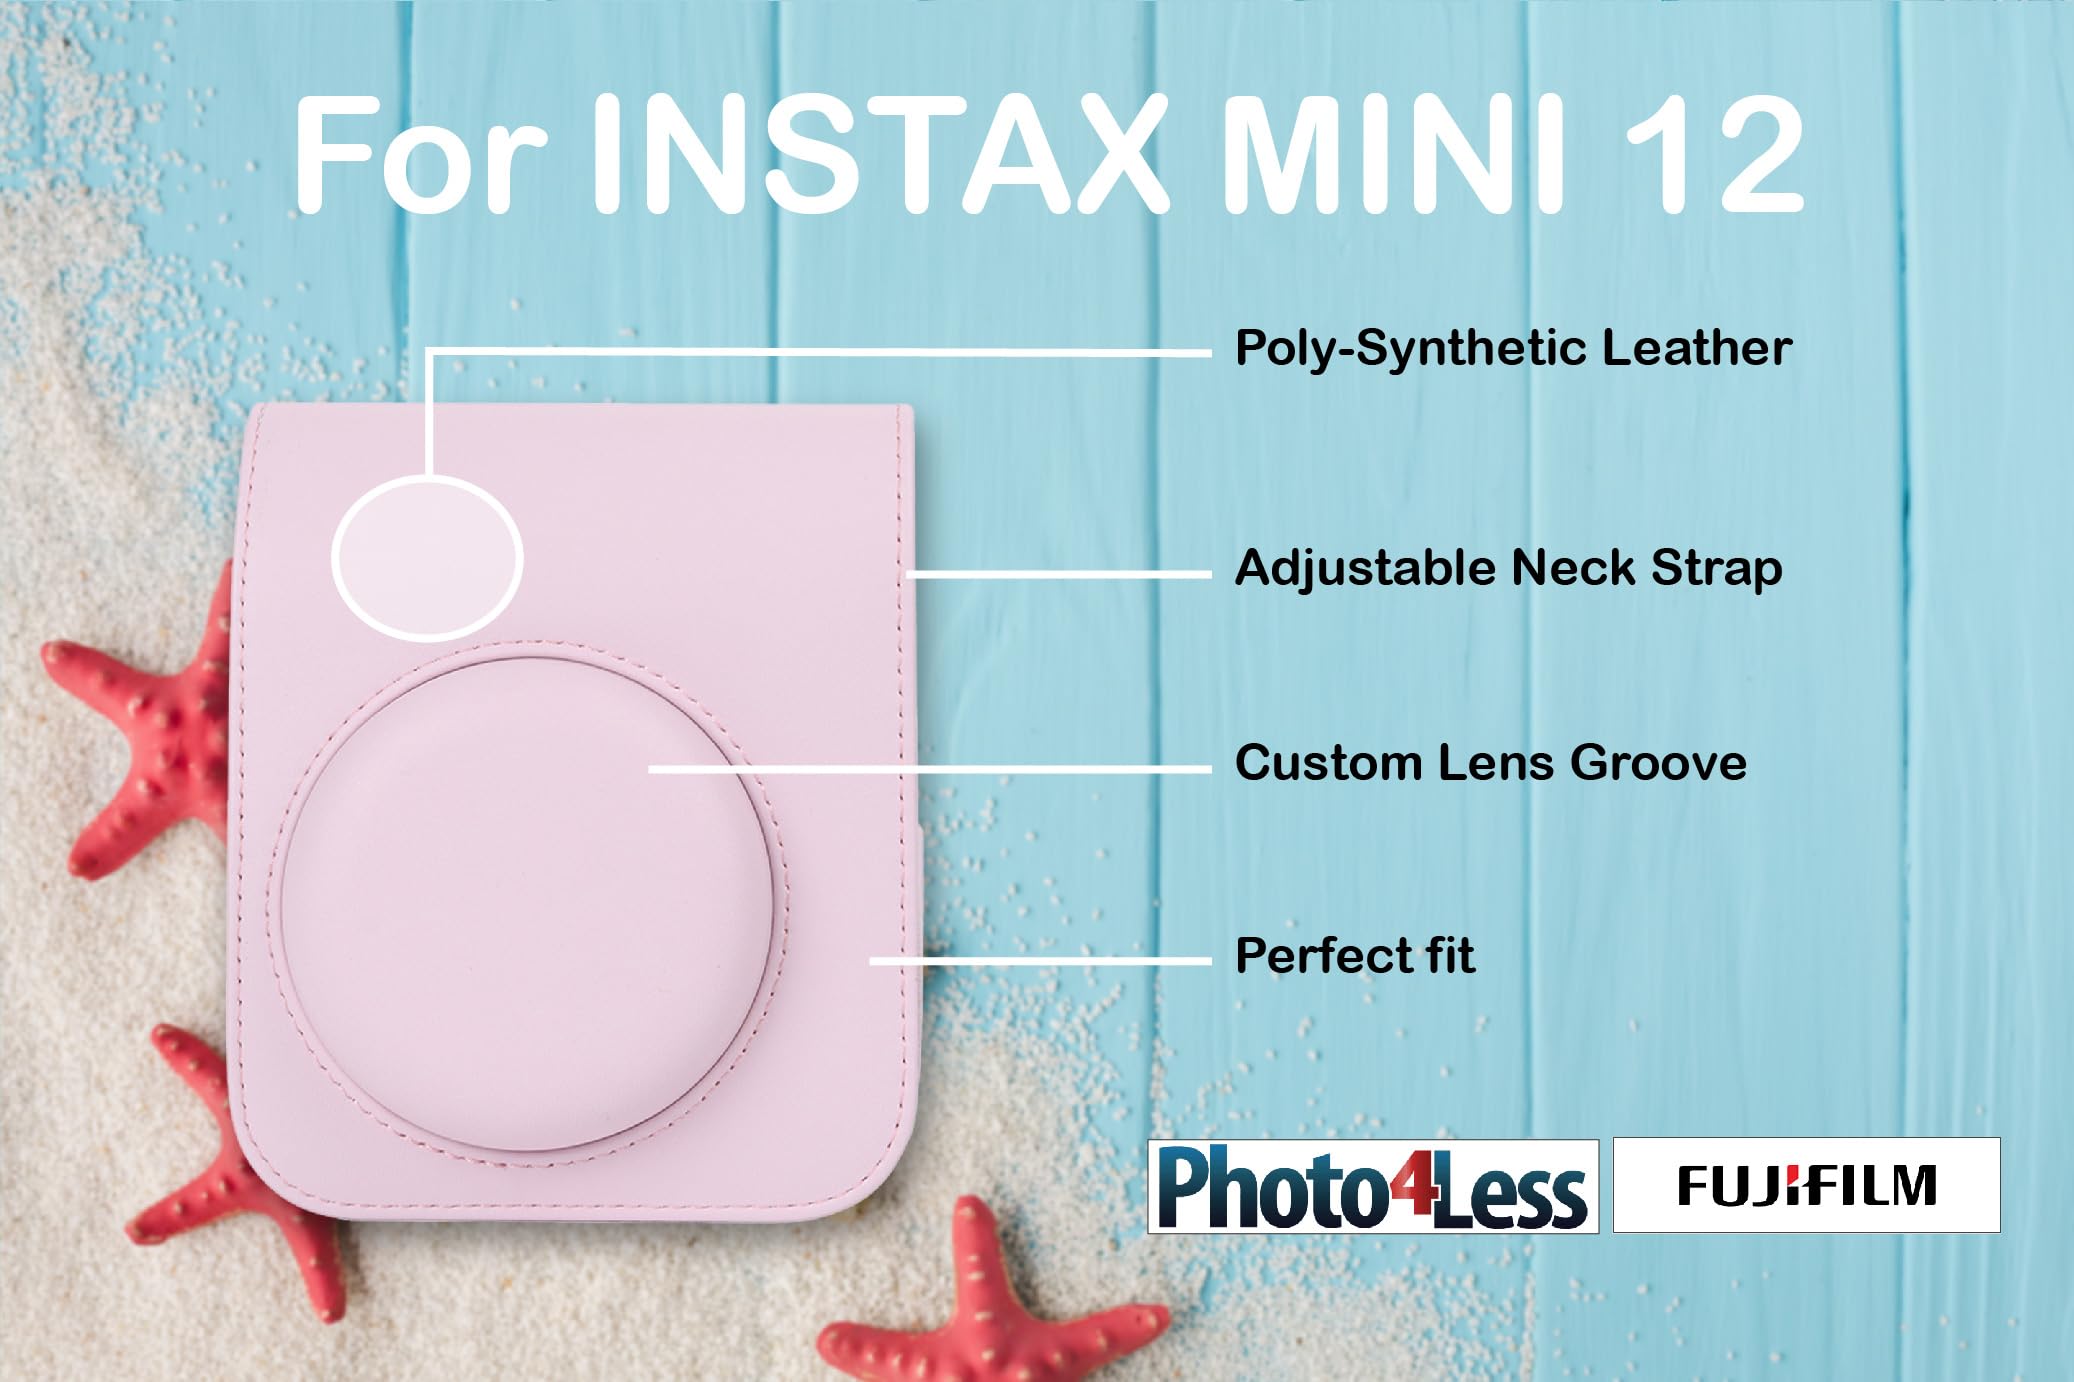 FUJIFILM INSTAX Mini 12 Instant Film Camera (Blossom Pink) Bundle with Fuji Instax Instant Film Single Pack, 10 Prints | Protective Case Pink | Photo Album Pink | Travel Stickers (6 Items)